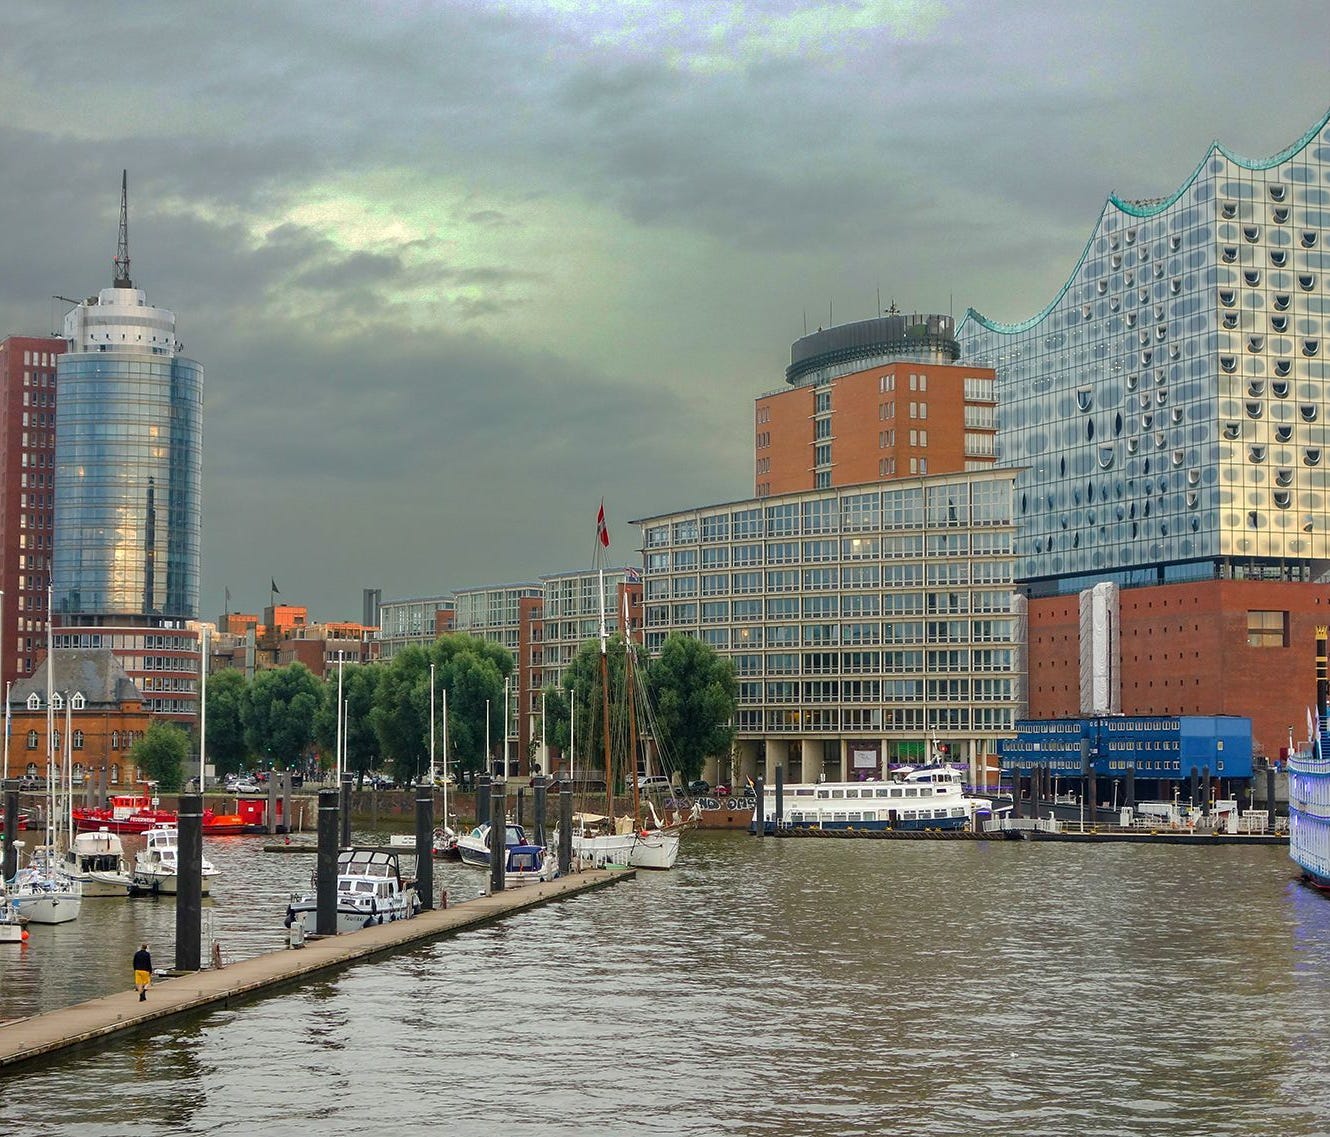 The burgeoning HafenCity district and its spectacular new Elbphilharmonie concert hall are revitalizing Hamburg's riverfront.